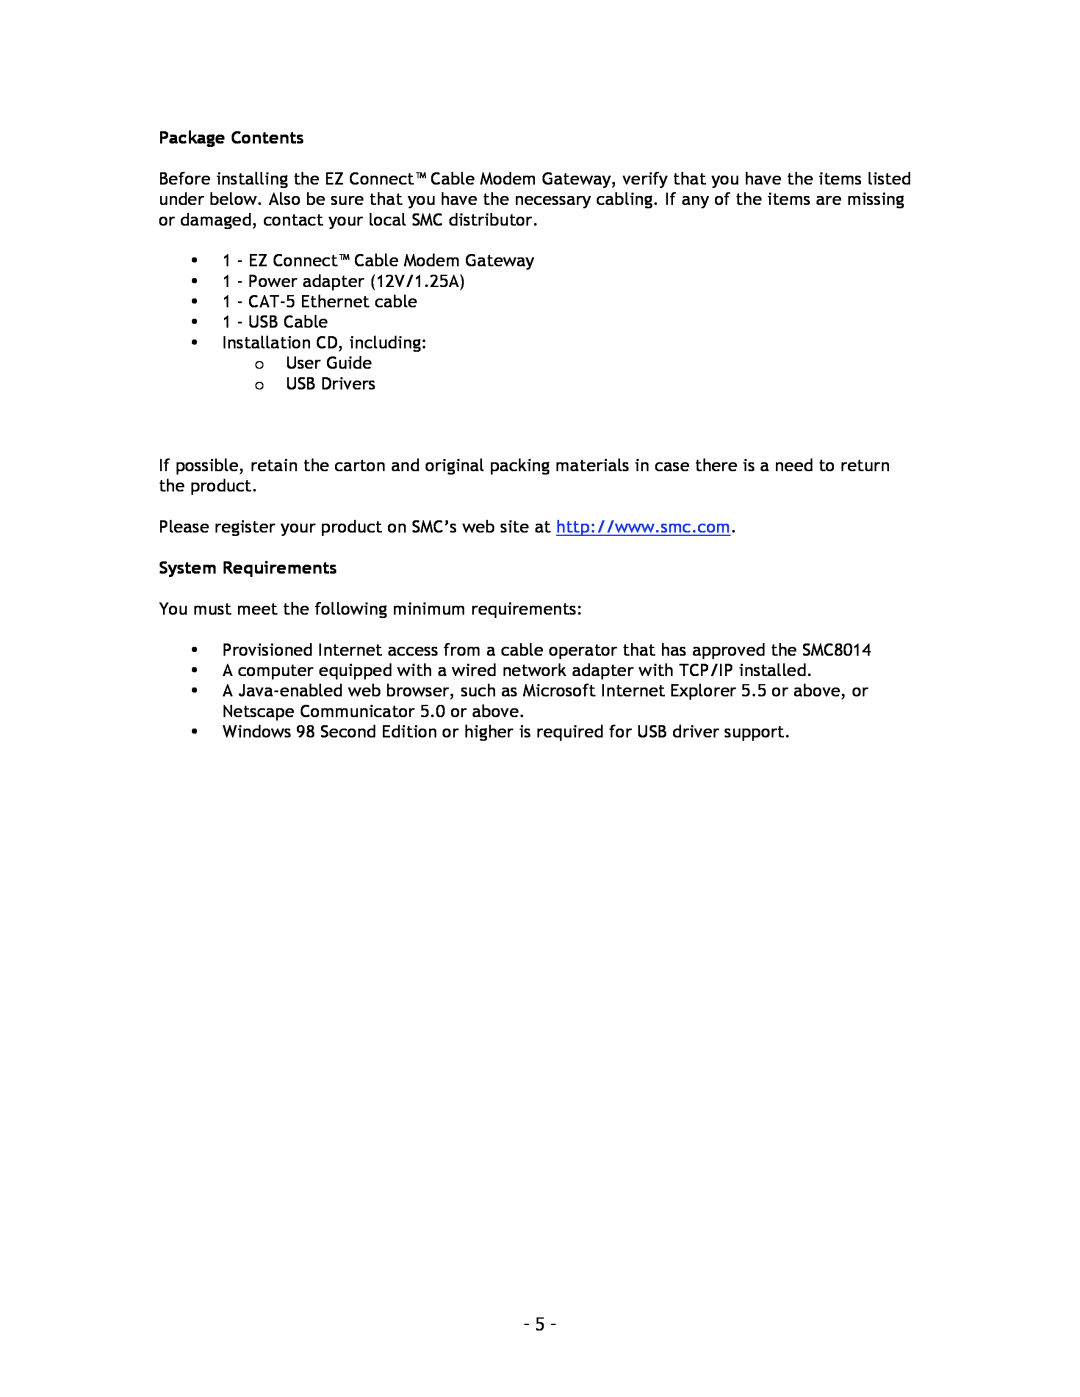 SMC Networks SMC8014 manual Package Contents, System Requirements 